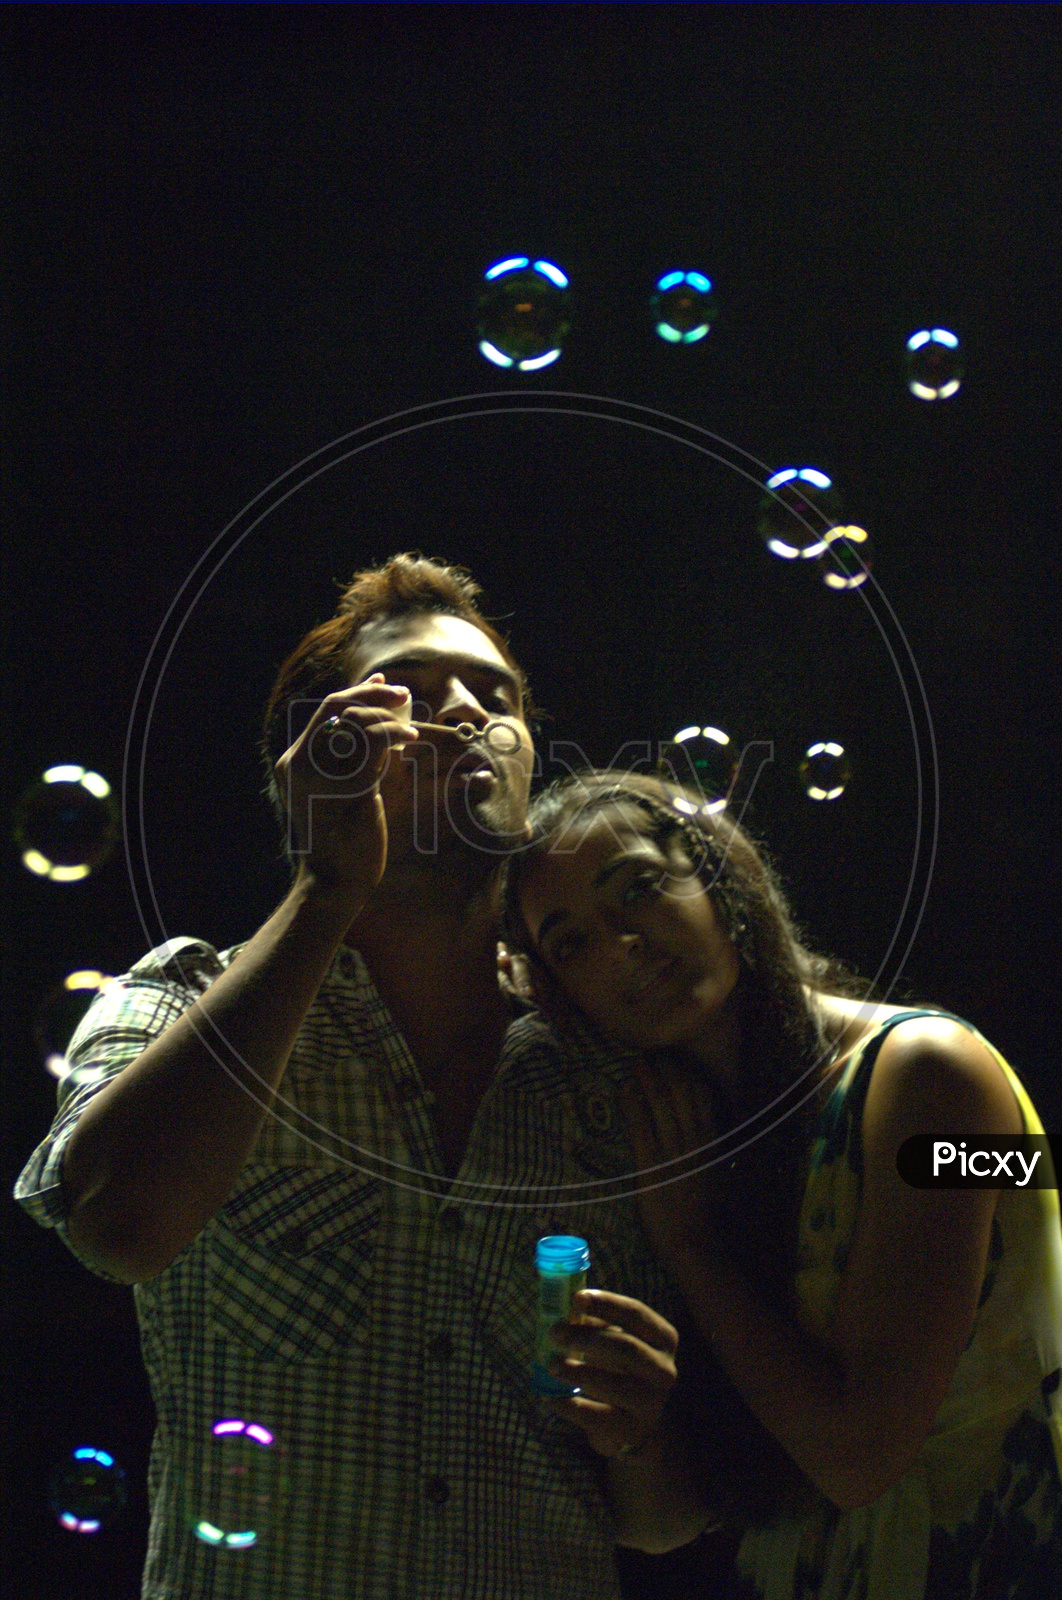 Young Indian Couple Playing with Bubbles